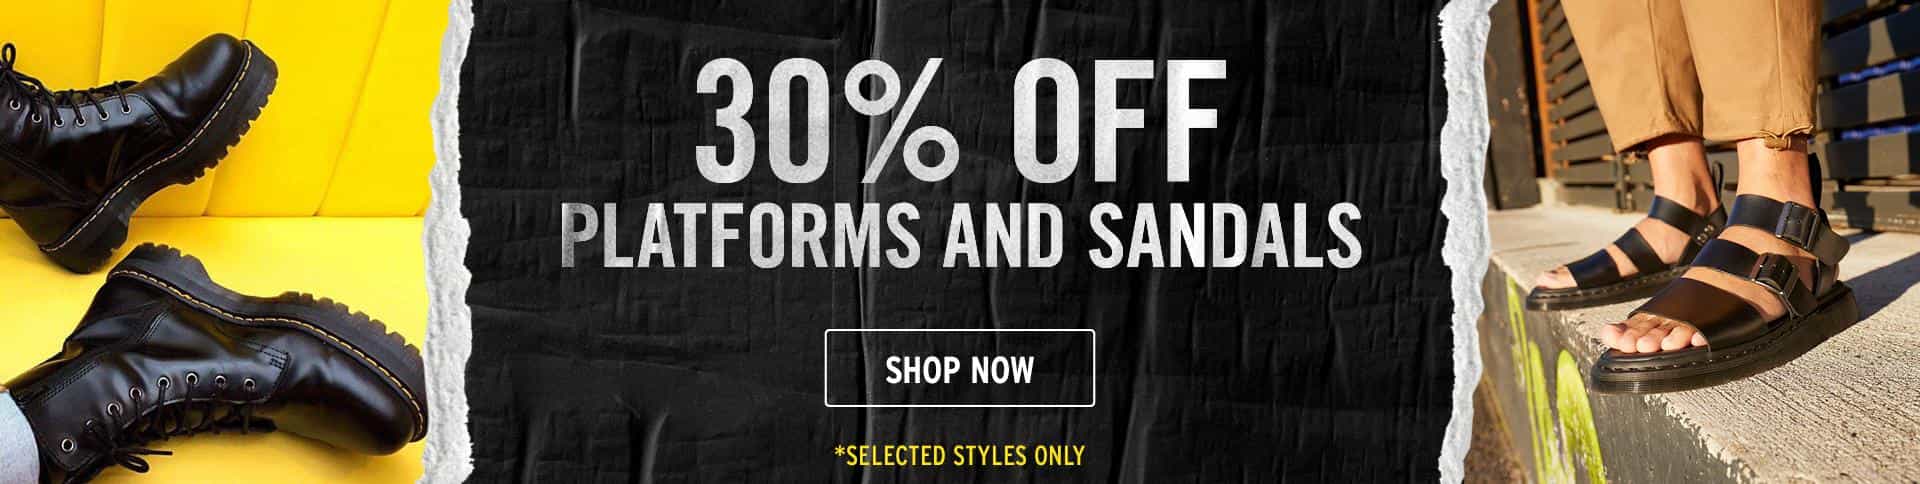 VOSN sale - Save 30% OFF on platforms and sandals